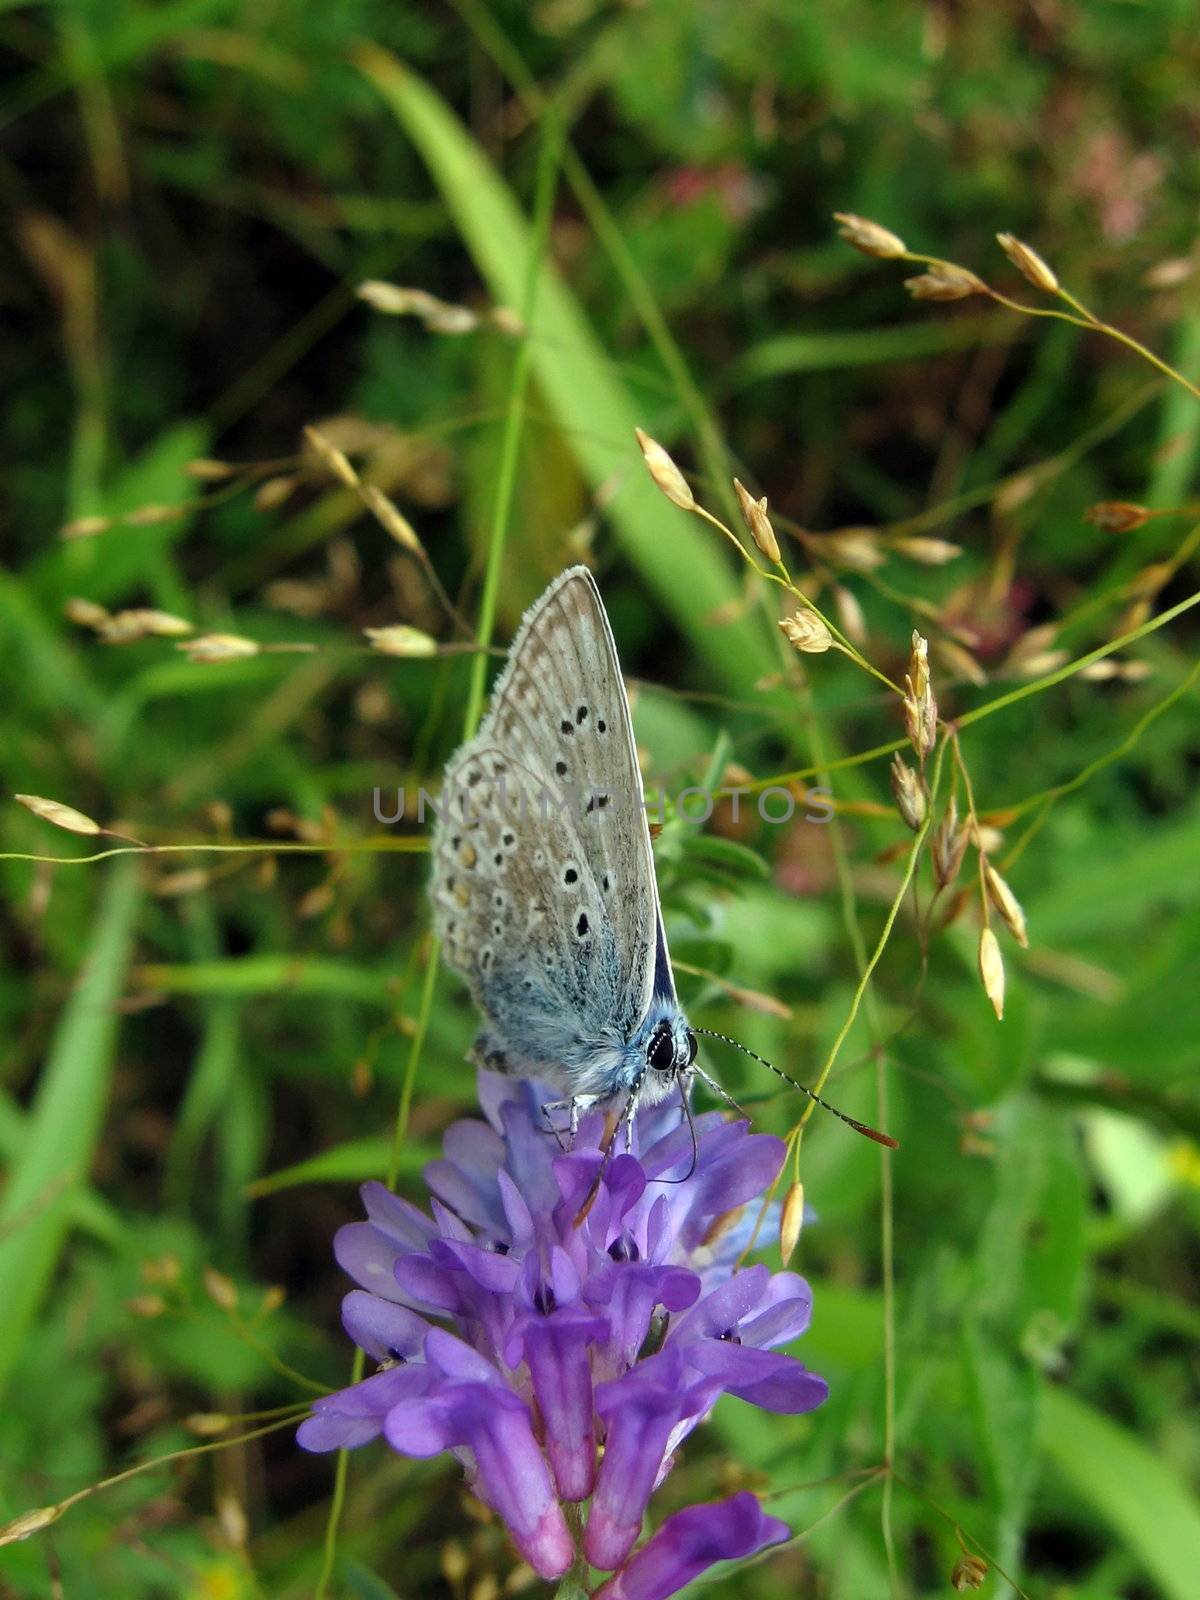 Blue butterfly on flower by tomatto